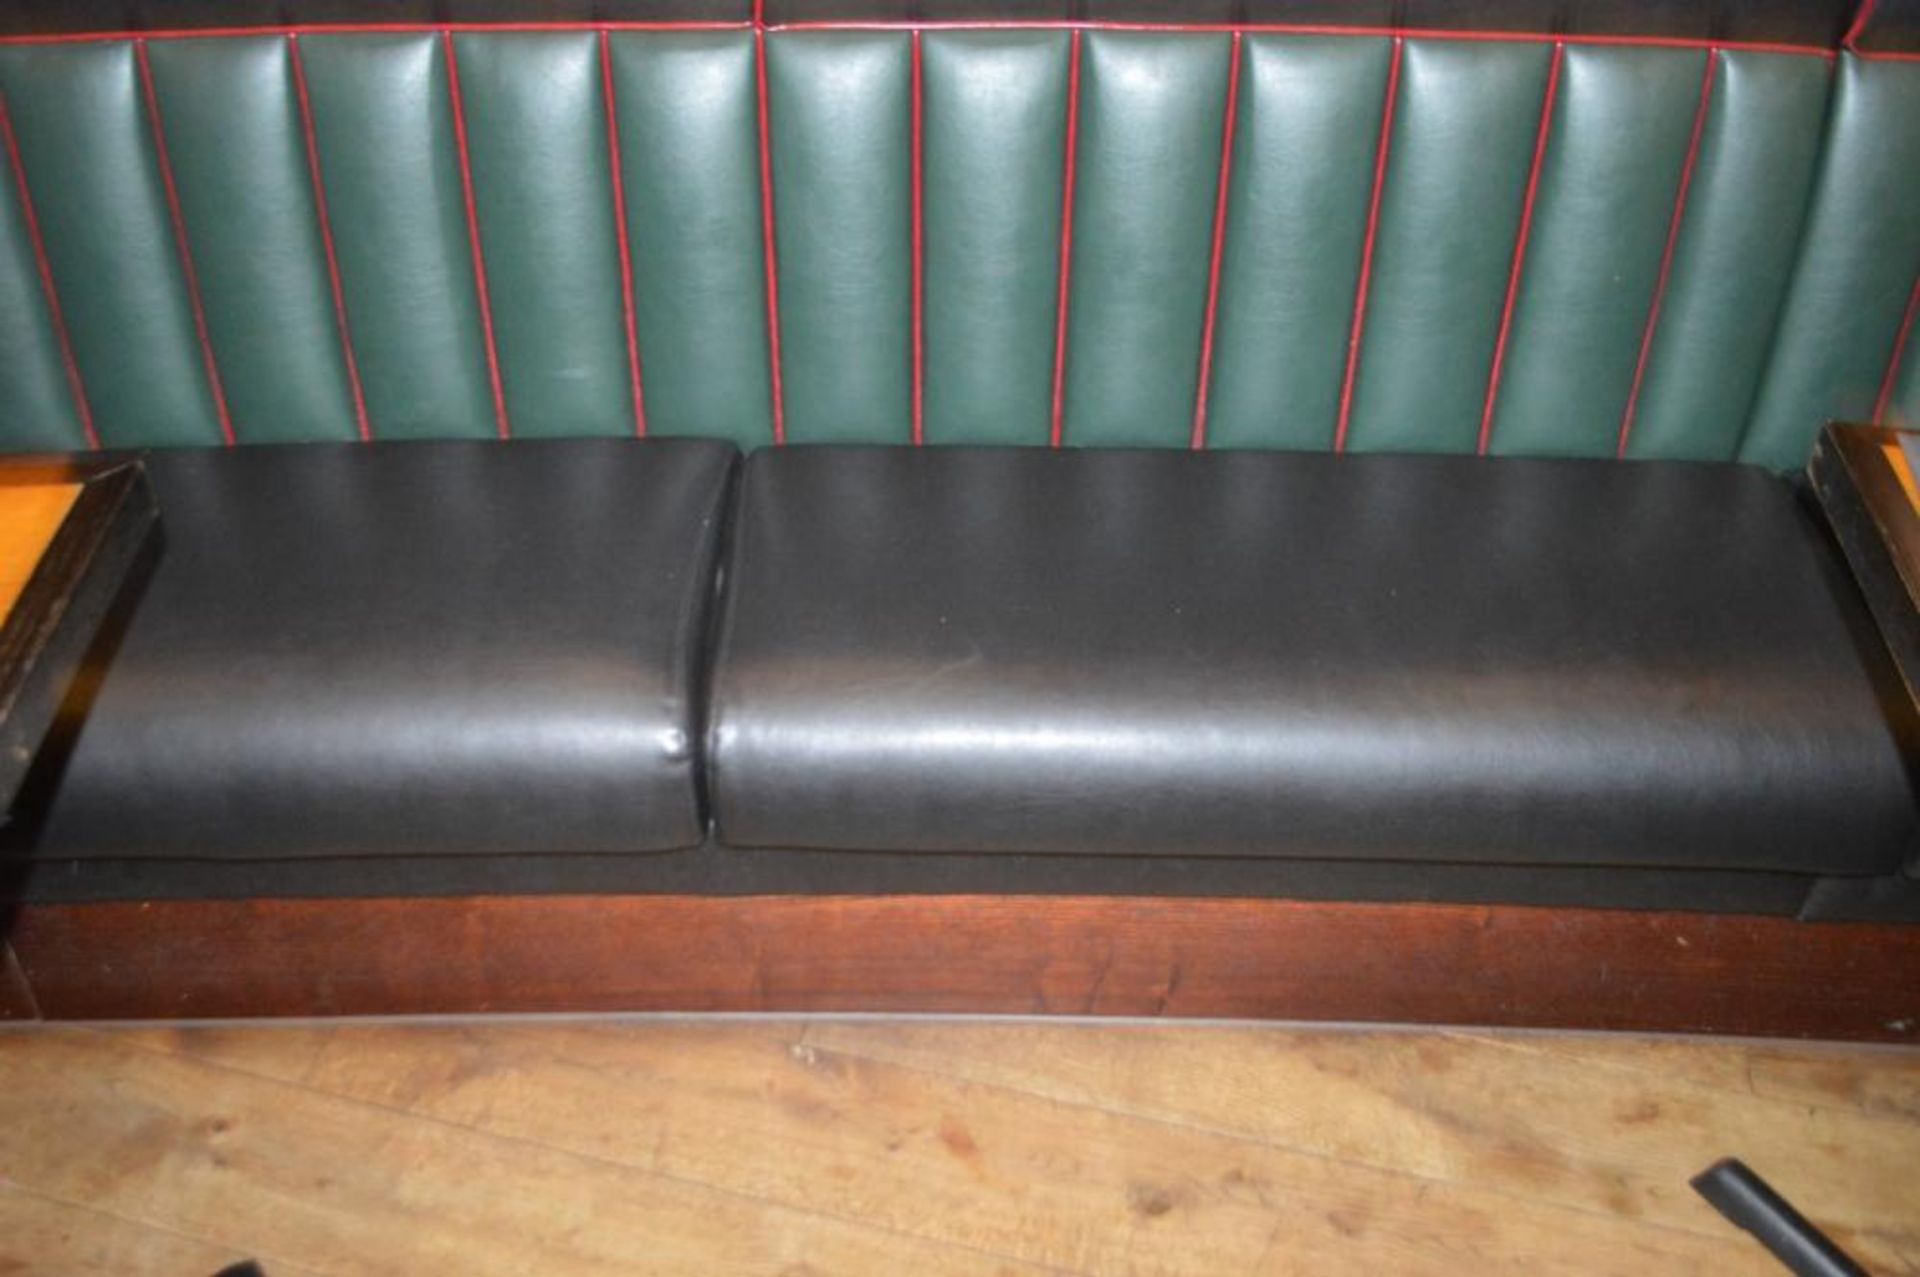 1 x Long Banquet Seating Bench - Features a Leather Upholstery With Green Backrests, Black Seat - Image 5 of 7